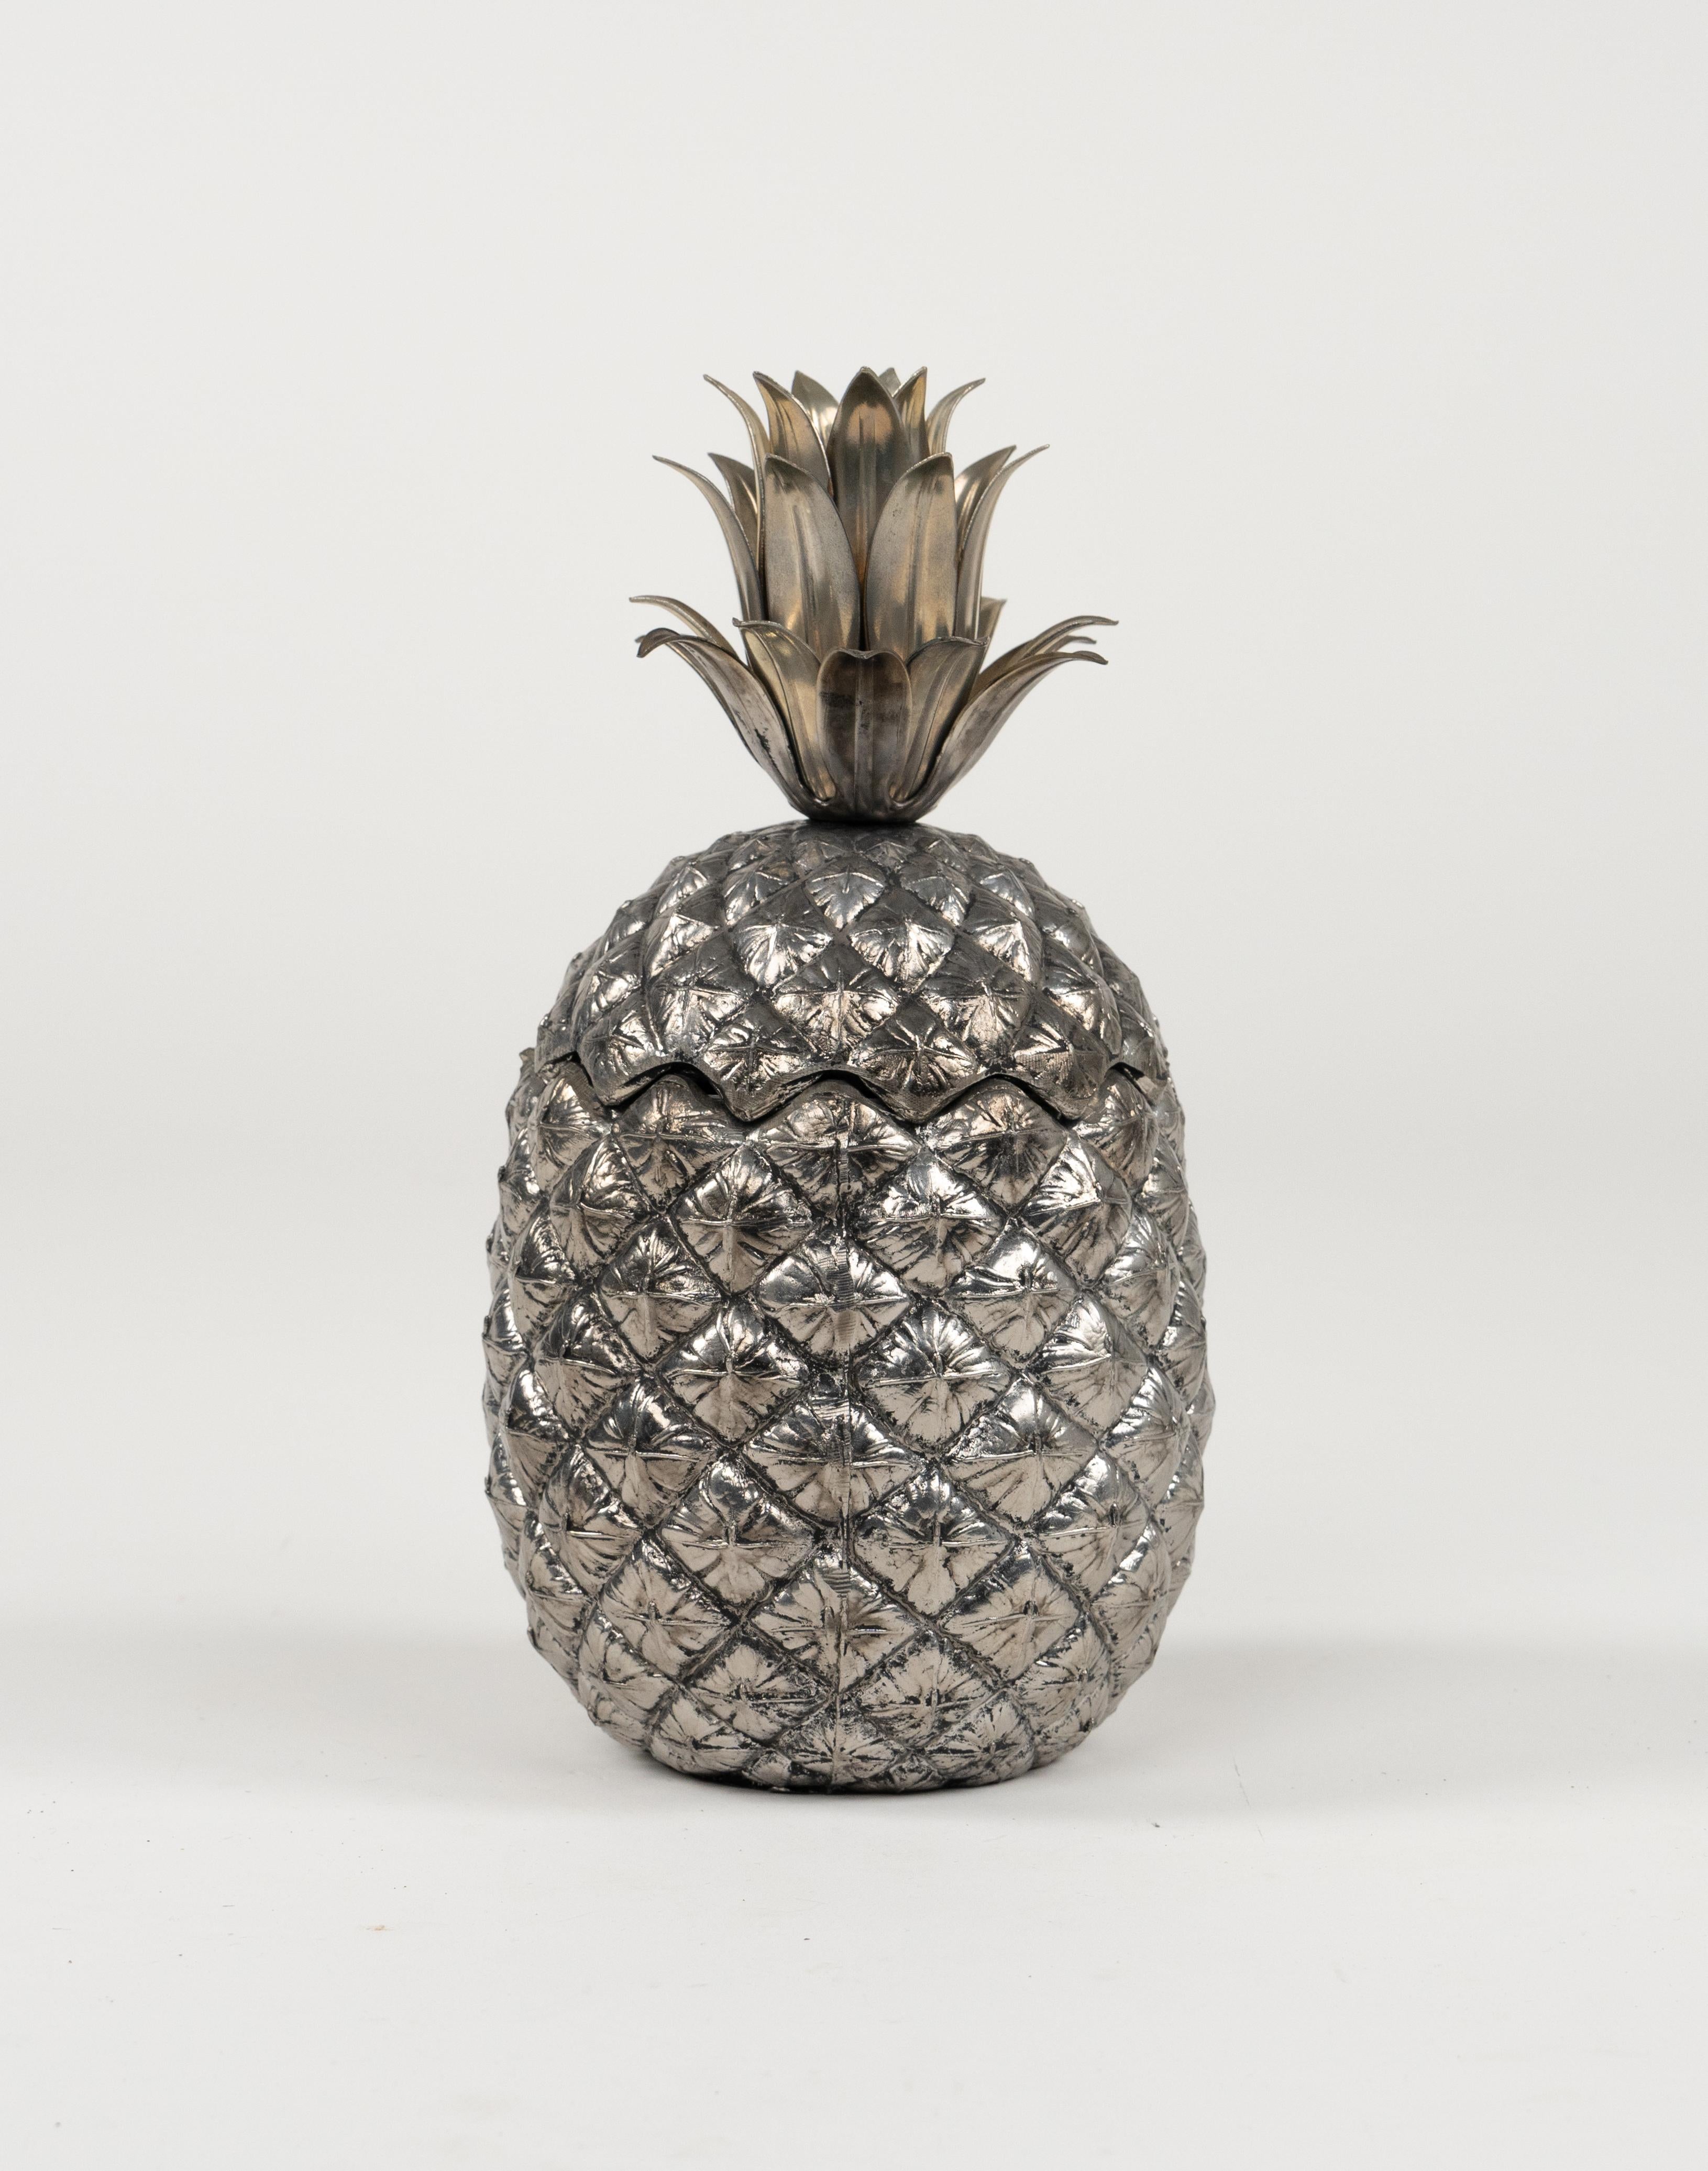 Midcentury Pewter Pineapple Form Ice Bucket by Mauro Manetti Italy, 1960s For Sale 1